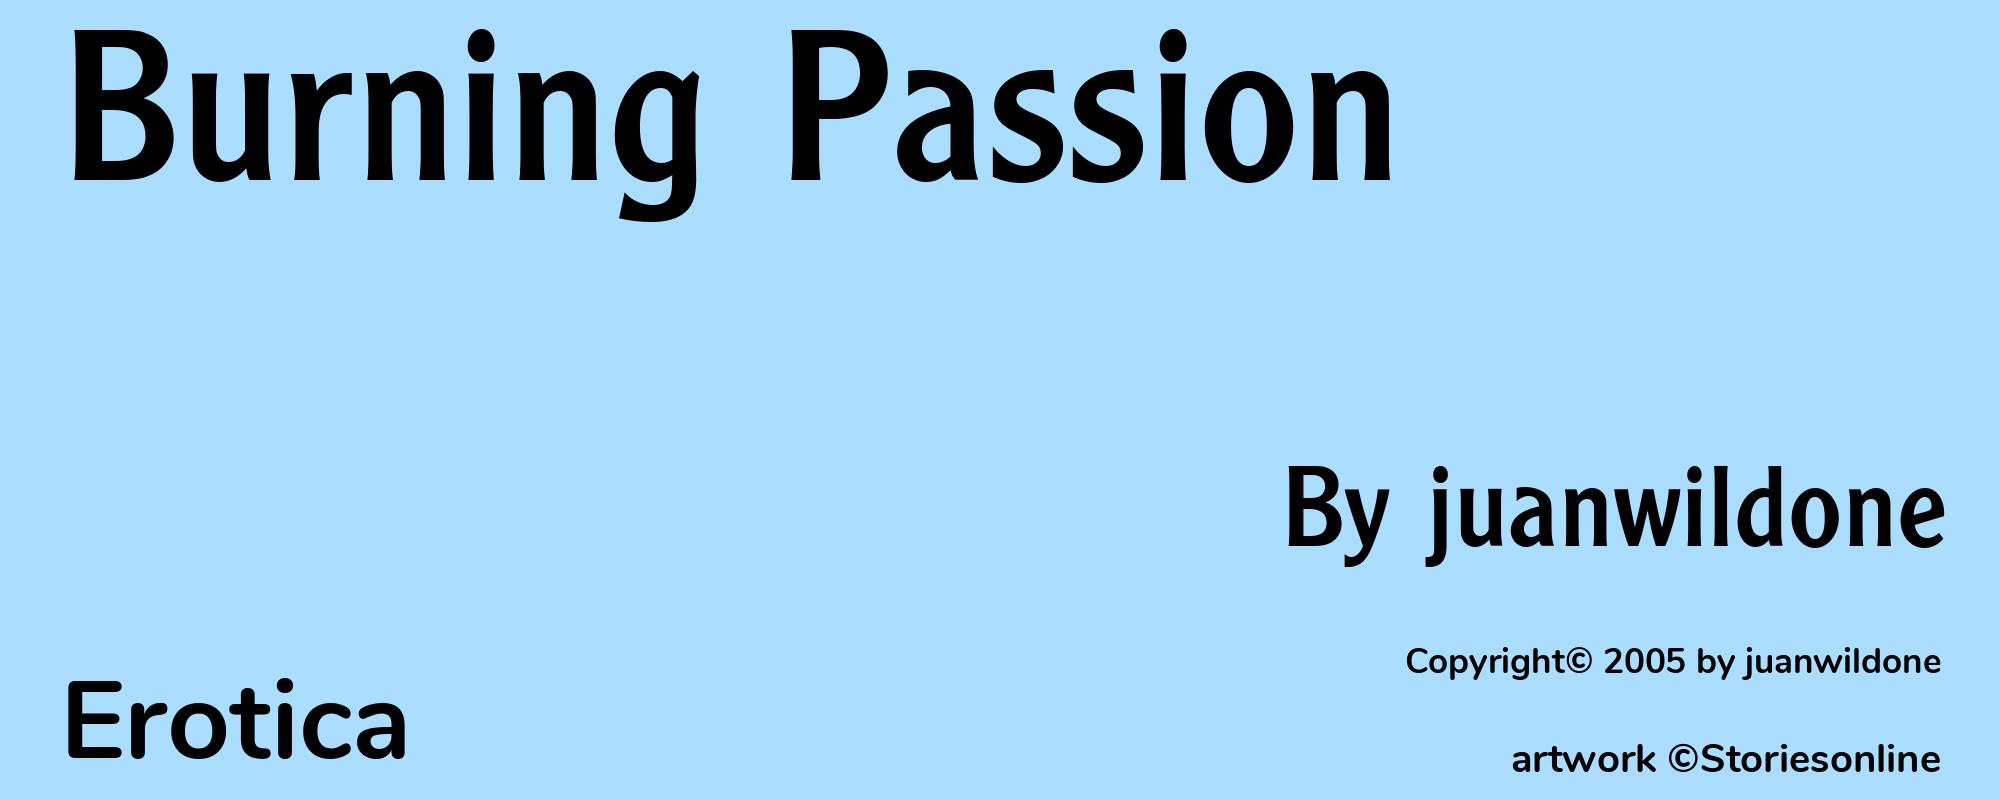 Burning Passion - Cover